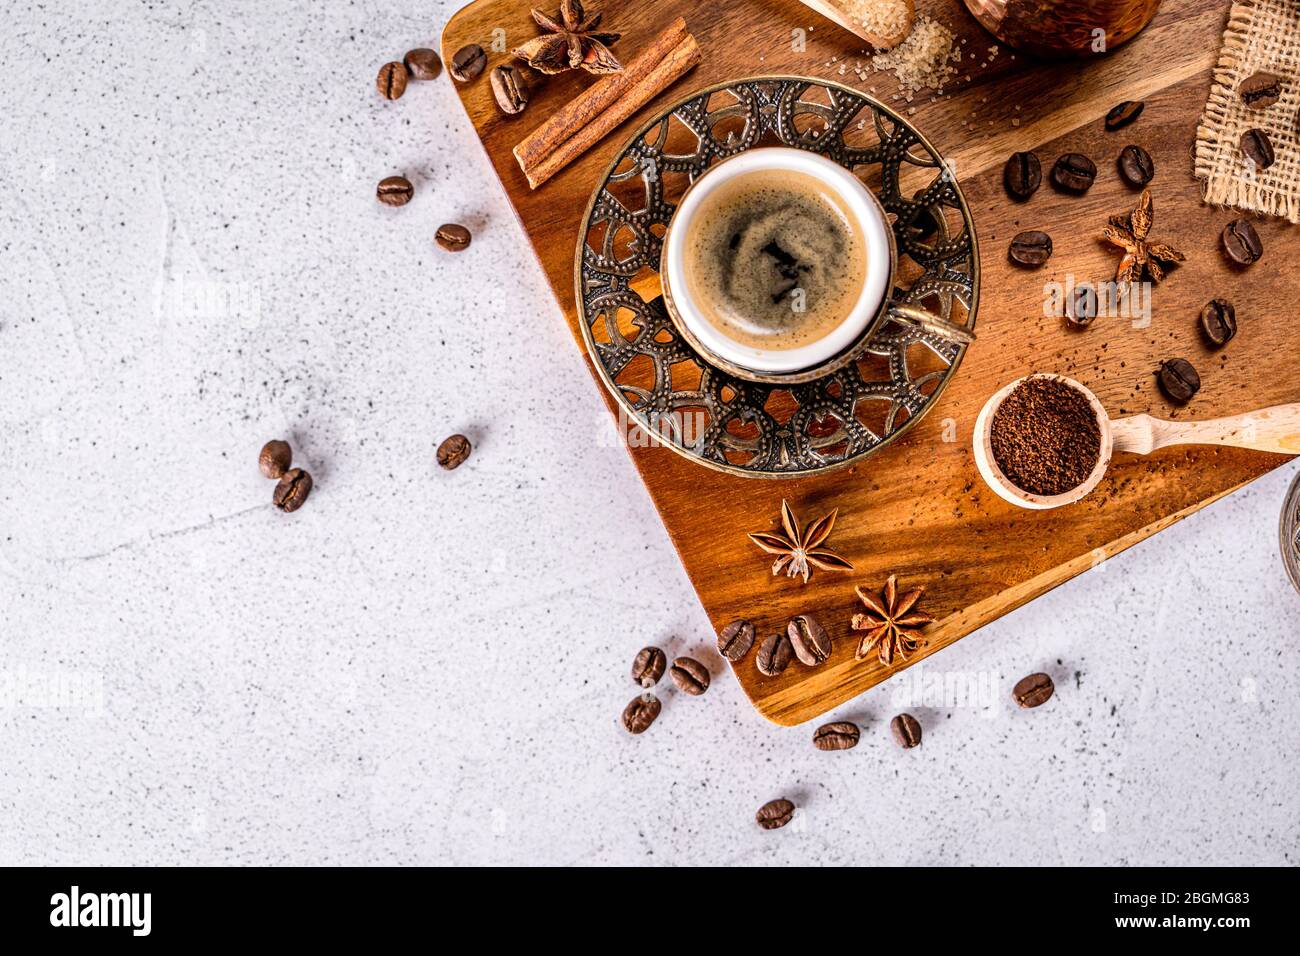 Top down view of a vintage turkish coffee cup with spices, beans and ground coffee powder Stock Photo